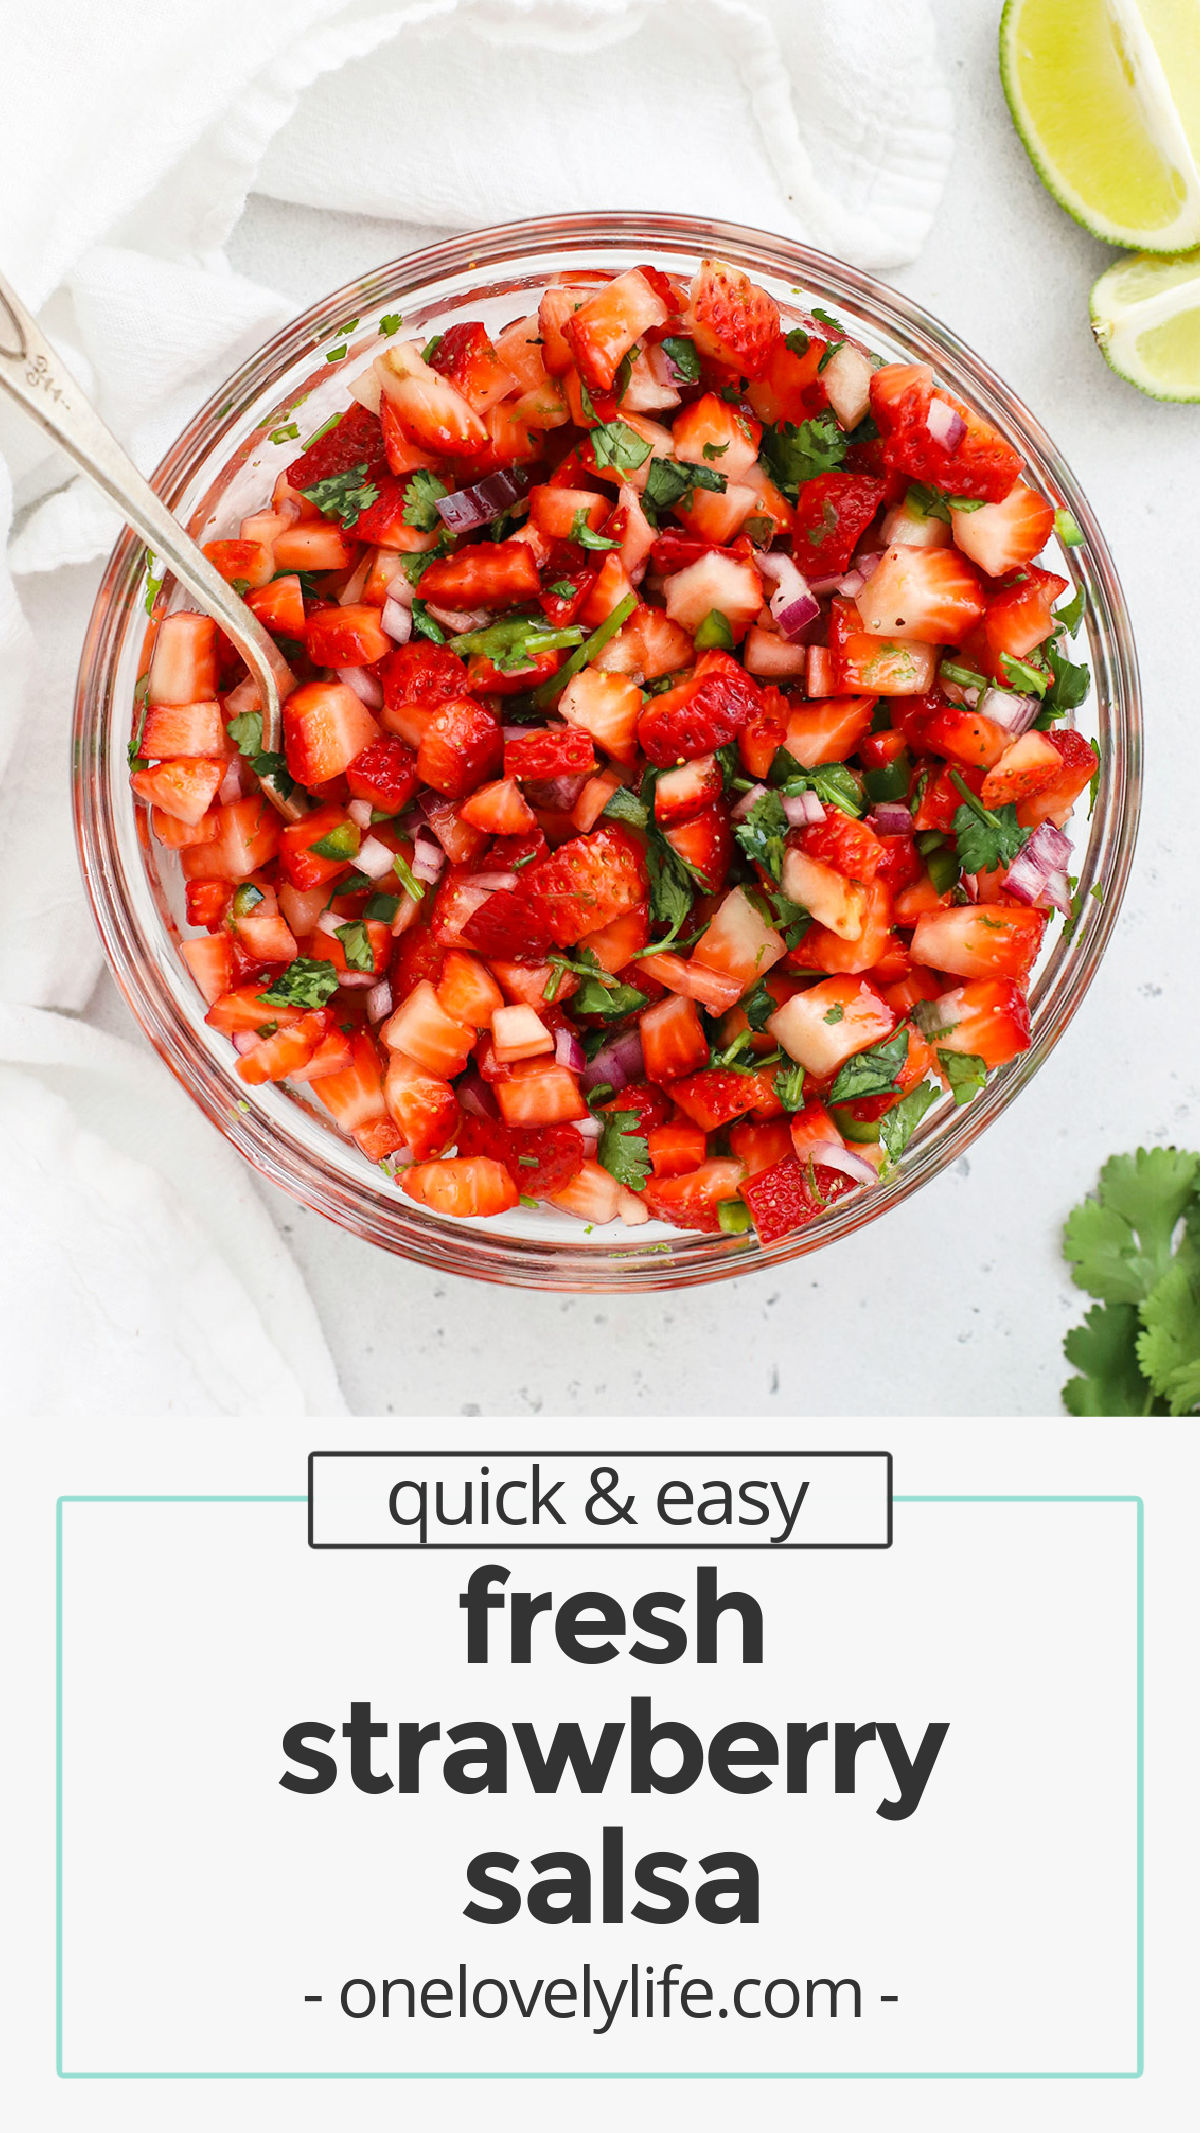 Sweet & Spicy Strawberry Salsa - This easy strawberry salsa recipe is such a delightful change of pace. It's a gorgeous blend of sweet & savory. You'll love it! // fruit salsa recipe // fresh strawberry salsa // vegan salsa // homemade salsa // sweet salsa // summer appetizer // spring appetizer // bbq side dish // potluck recipe // gluten-free // vegan // paleo // whole30 // Tex-Mex // chip dip // tortilla chip dip // chips and salsa // strawberry recipes // healthy salsa // healthy recipe